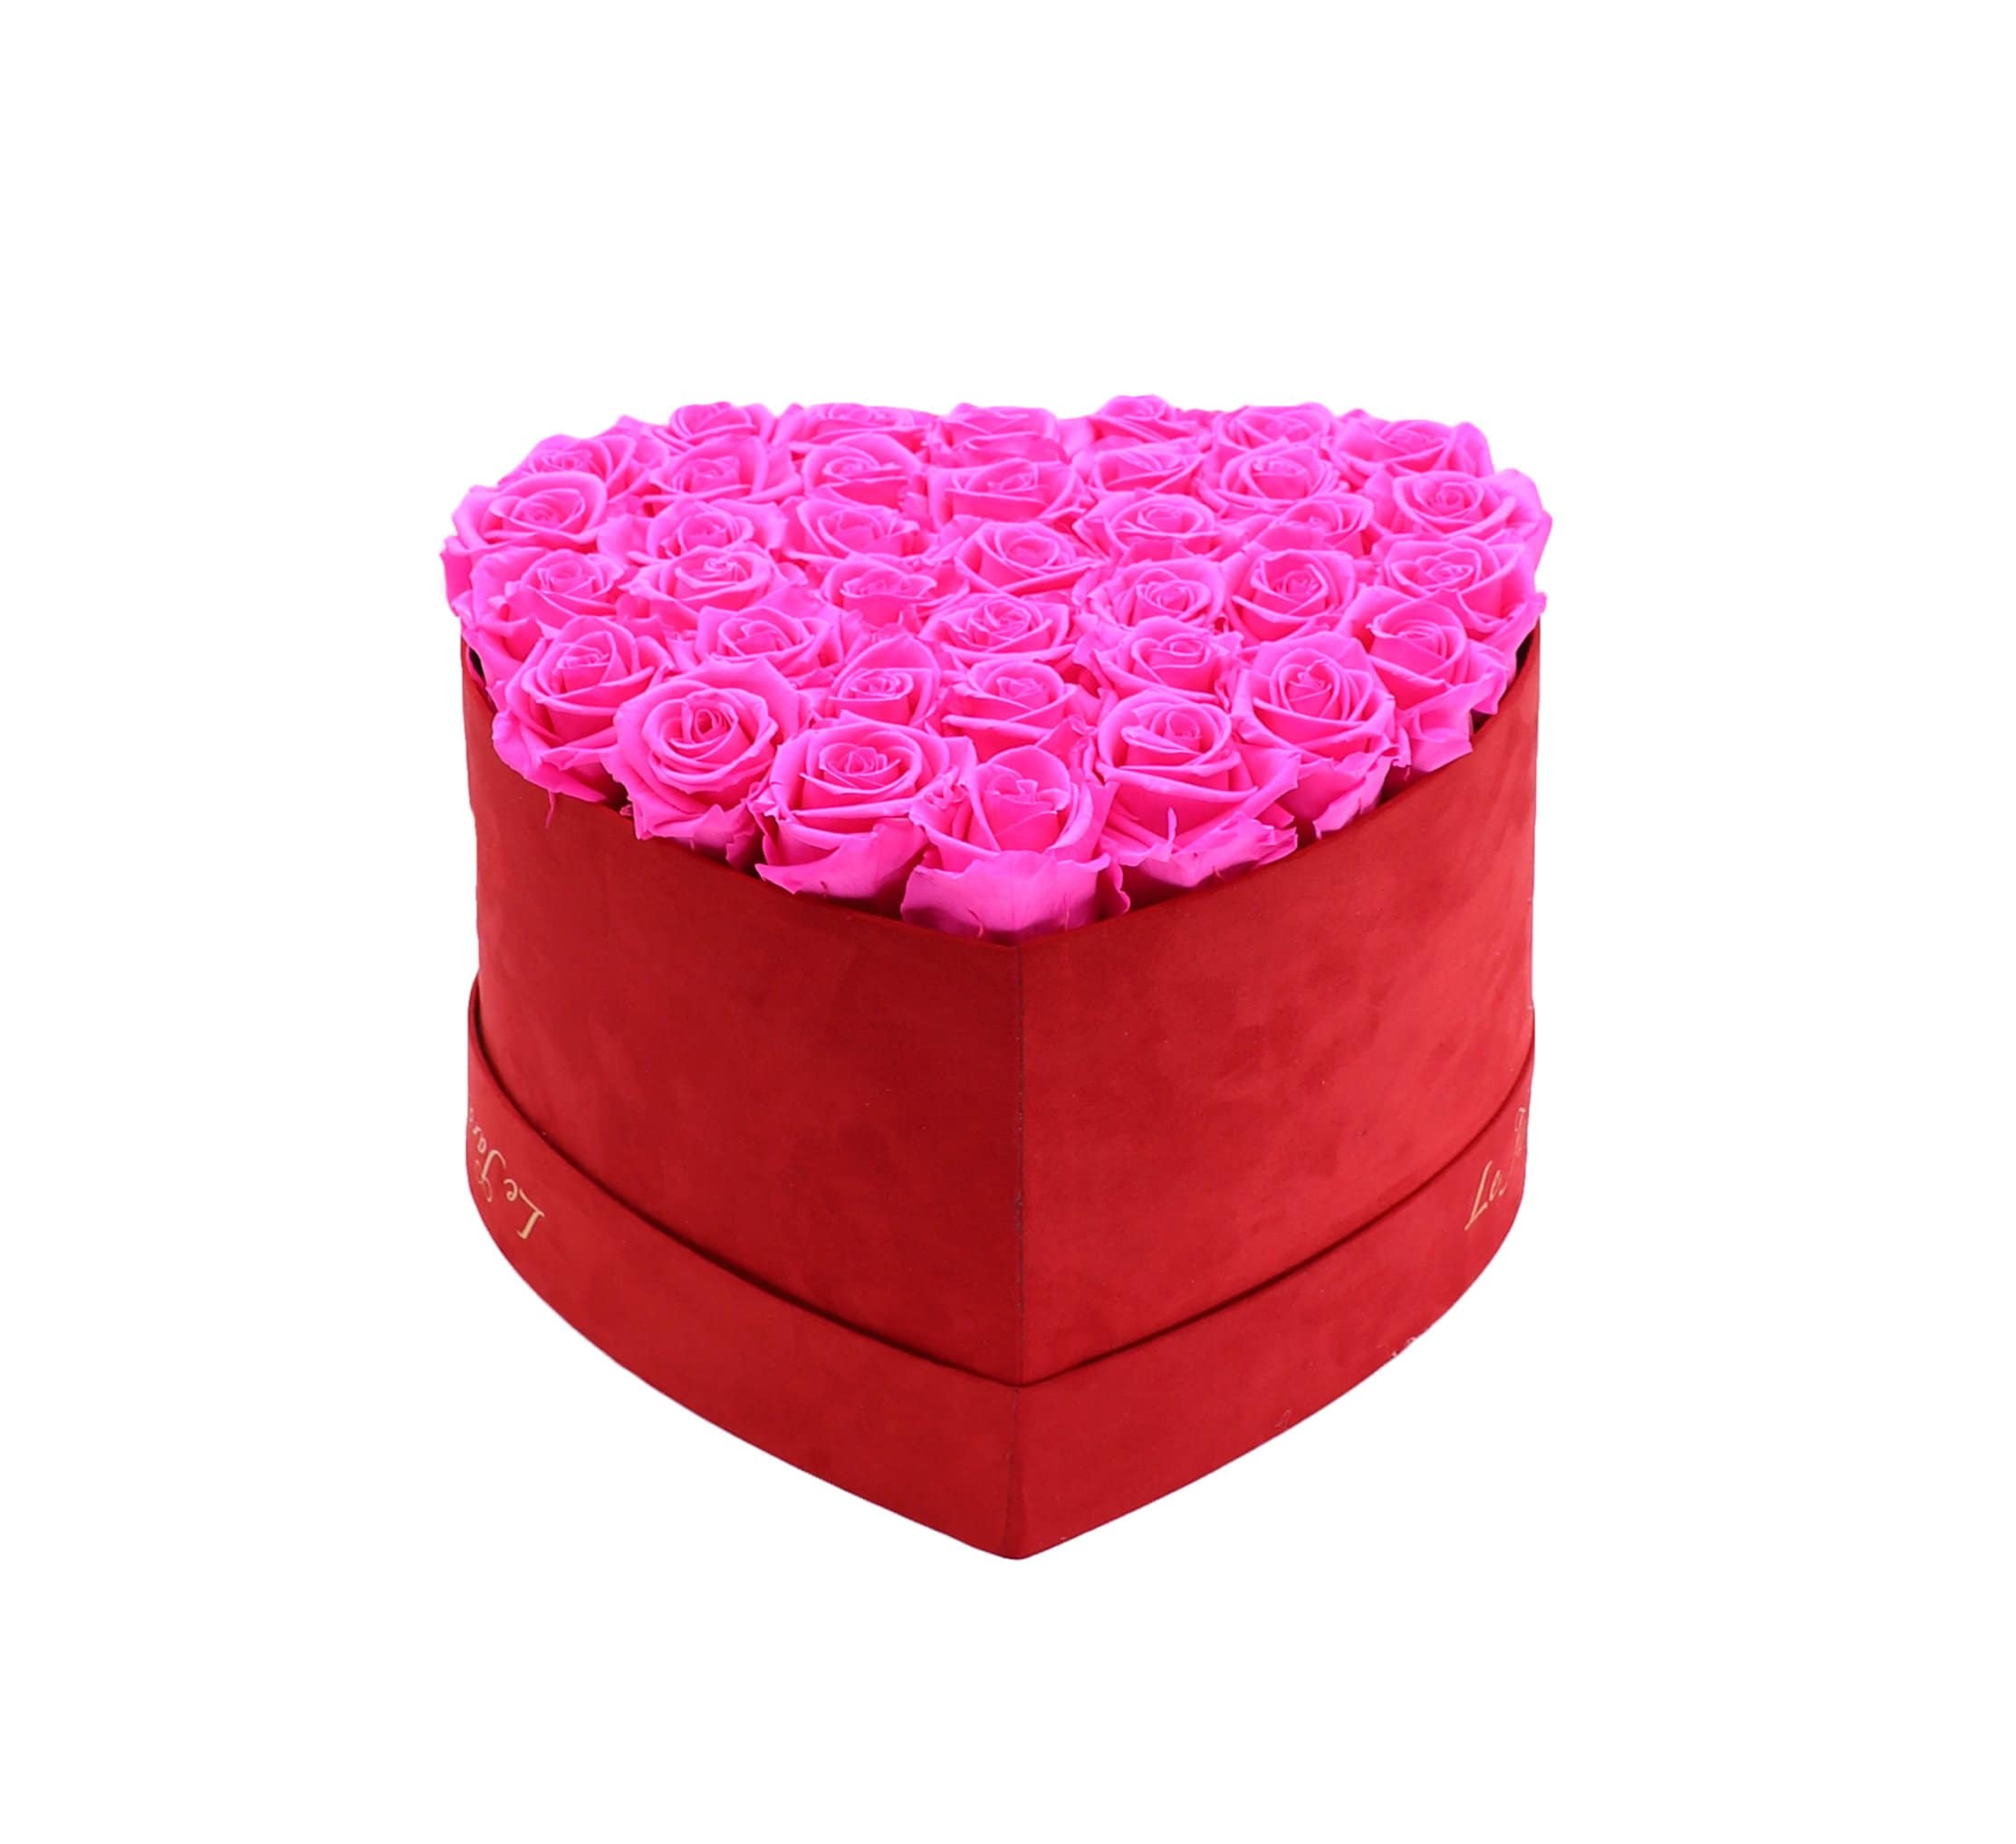 36 Neon Pink Preserved Roses in A Heart Shaped Box- Small Heart Luxury Red Suede Box